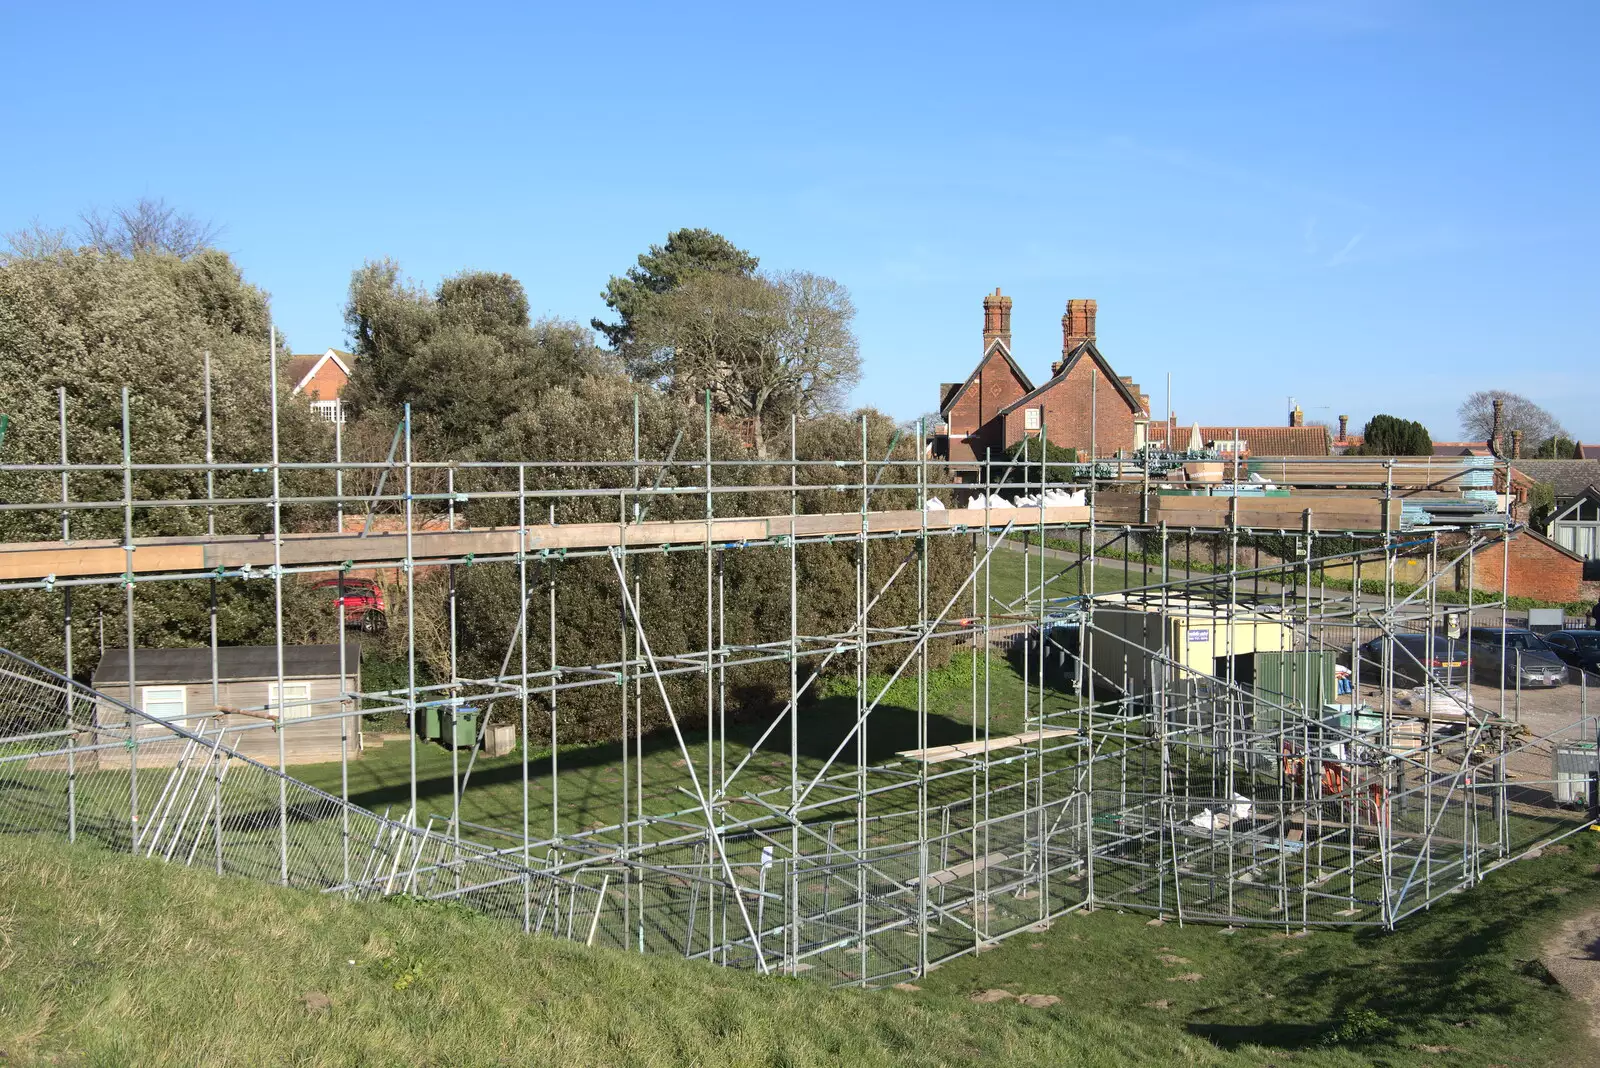 There's also a huge scaffolding pier, from A Trip to Orford Castle, Orford, Suffolk - 26th February 2022